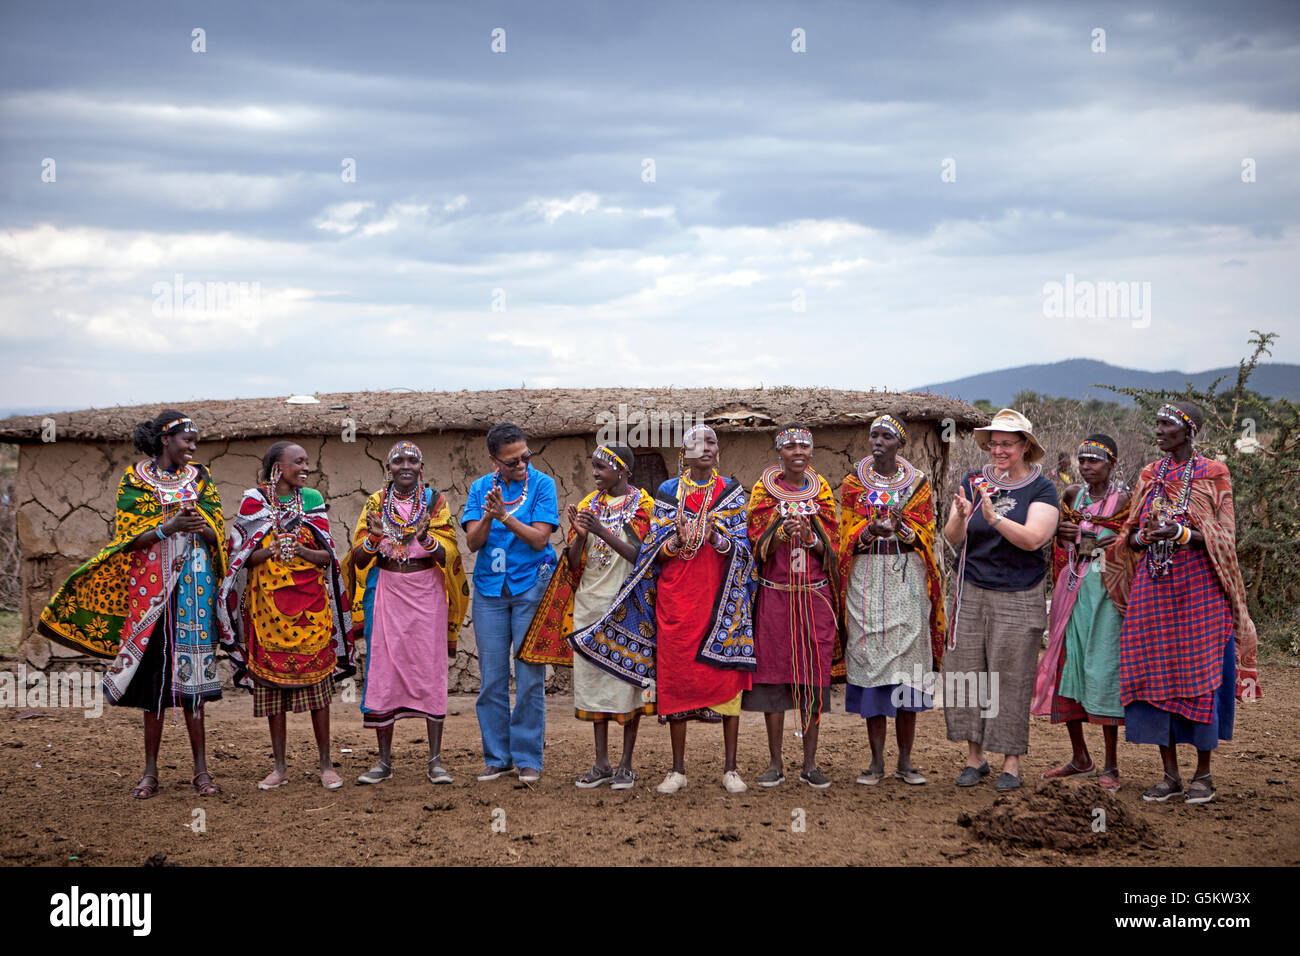 Group of Masai women and two tourists doing a ceremonial dance in a Masai village, Kenya, Africa. Stock Photo